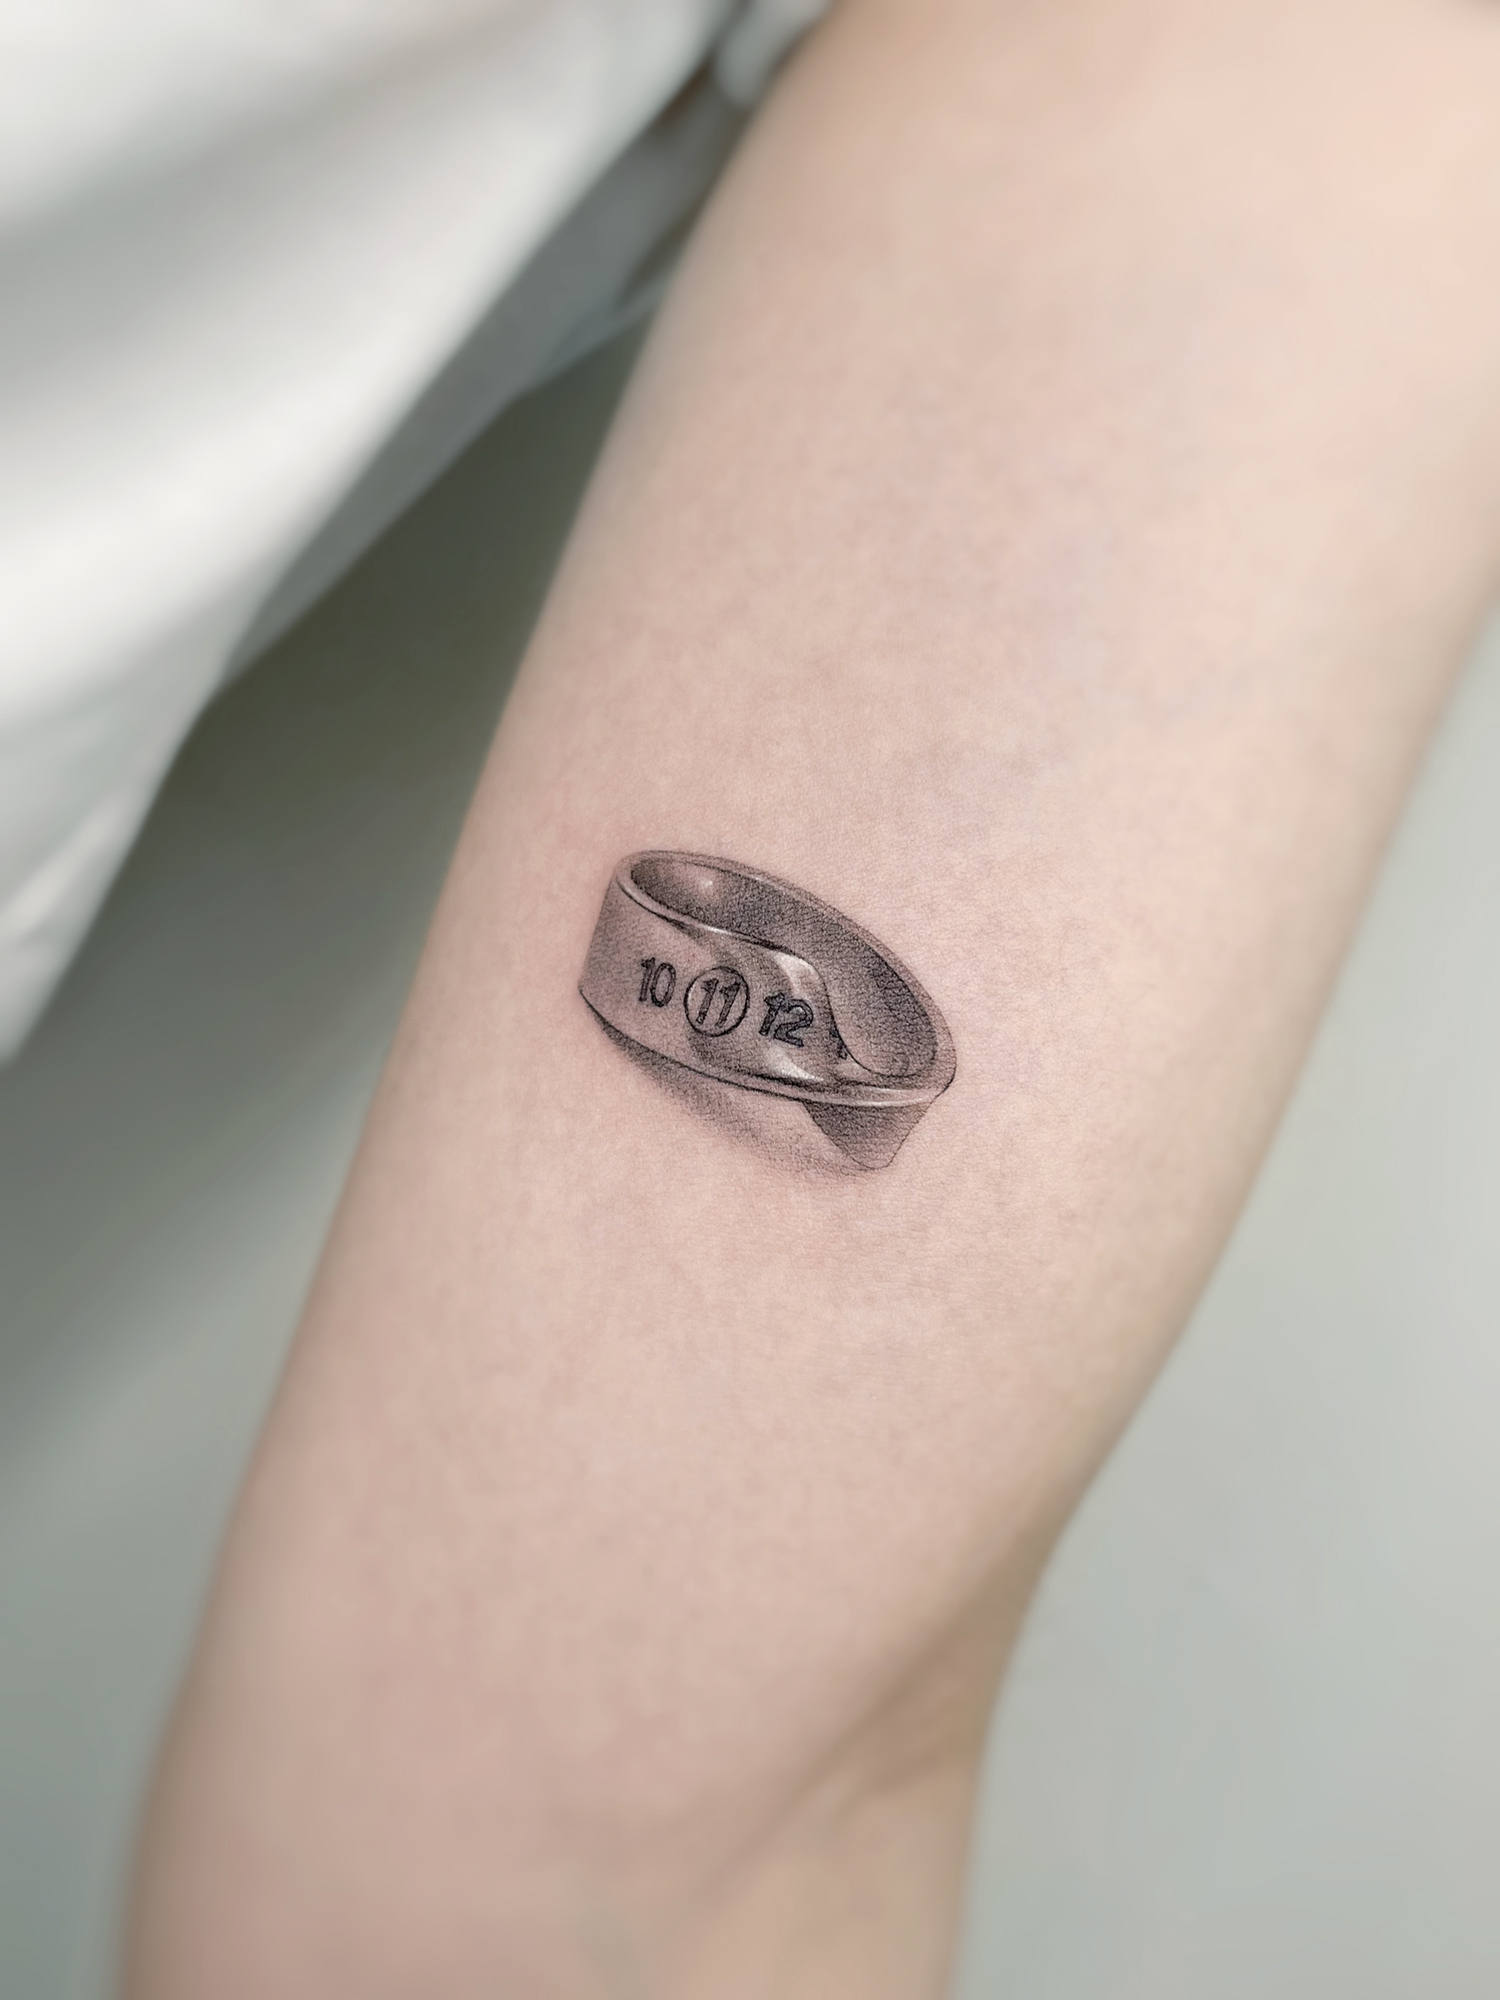 metal ring tattoo in 3d on arm